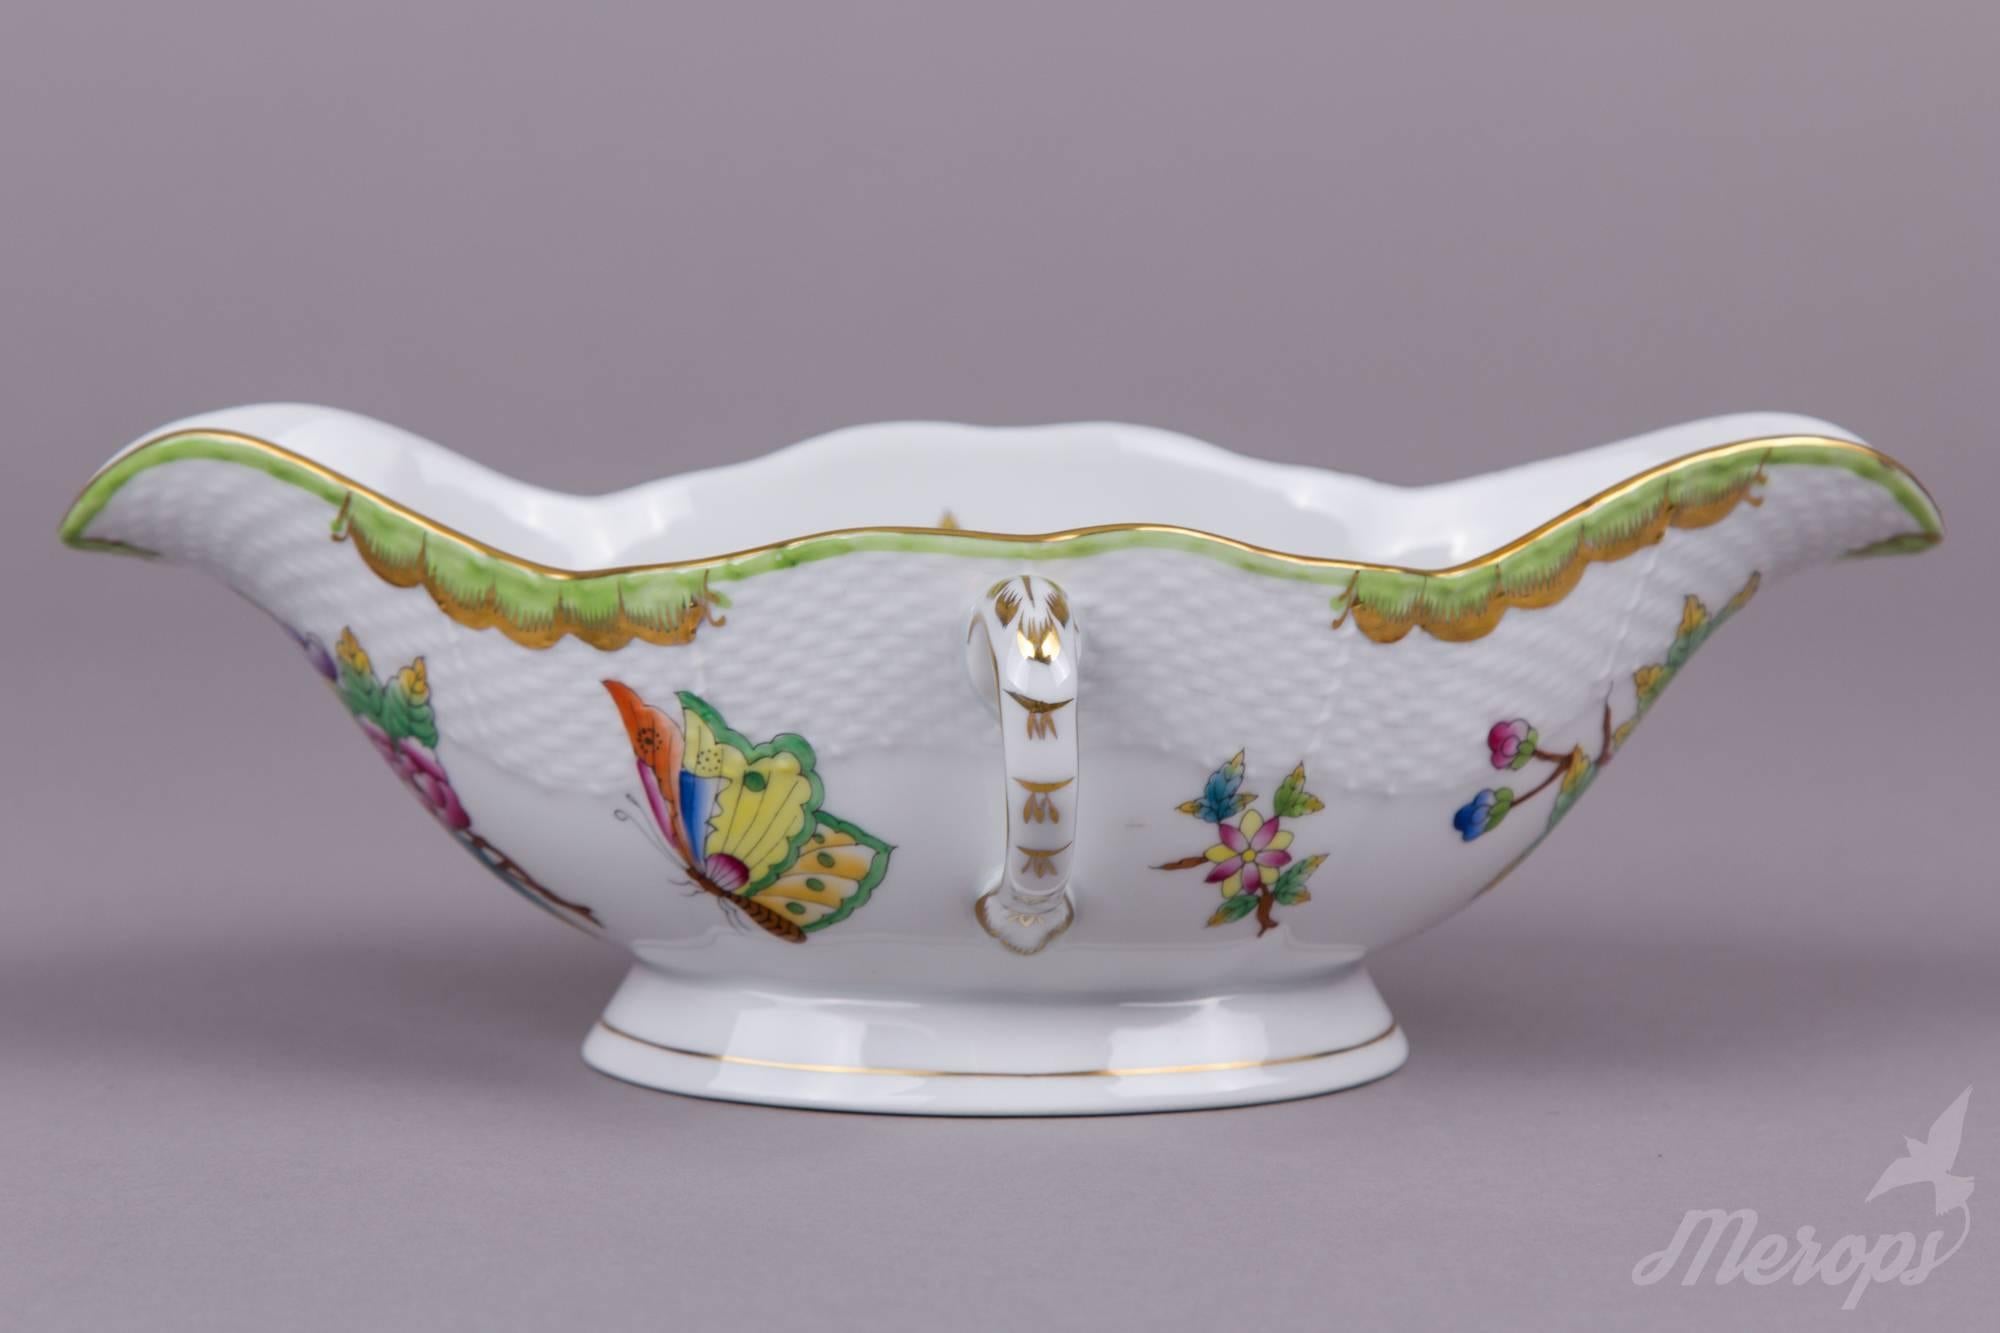 We ship this item worldwide for 30 USD with insurance. Shipping usually takes 5-10 business days. Express shipping with FedEx (1-2 days) available for 60 USD.

Manufacturer: Herend Porcelain Manufactory (Hungary).
Quality: Hand-painted, 1st